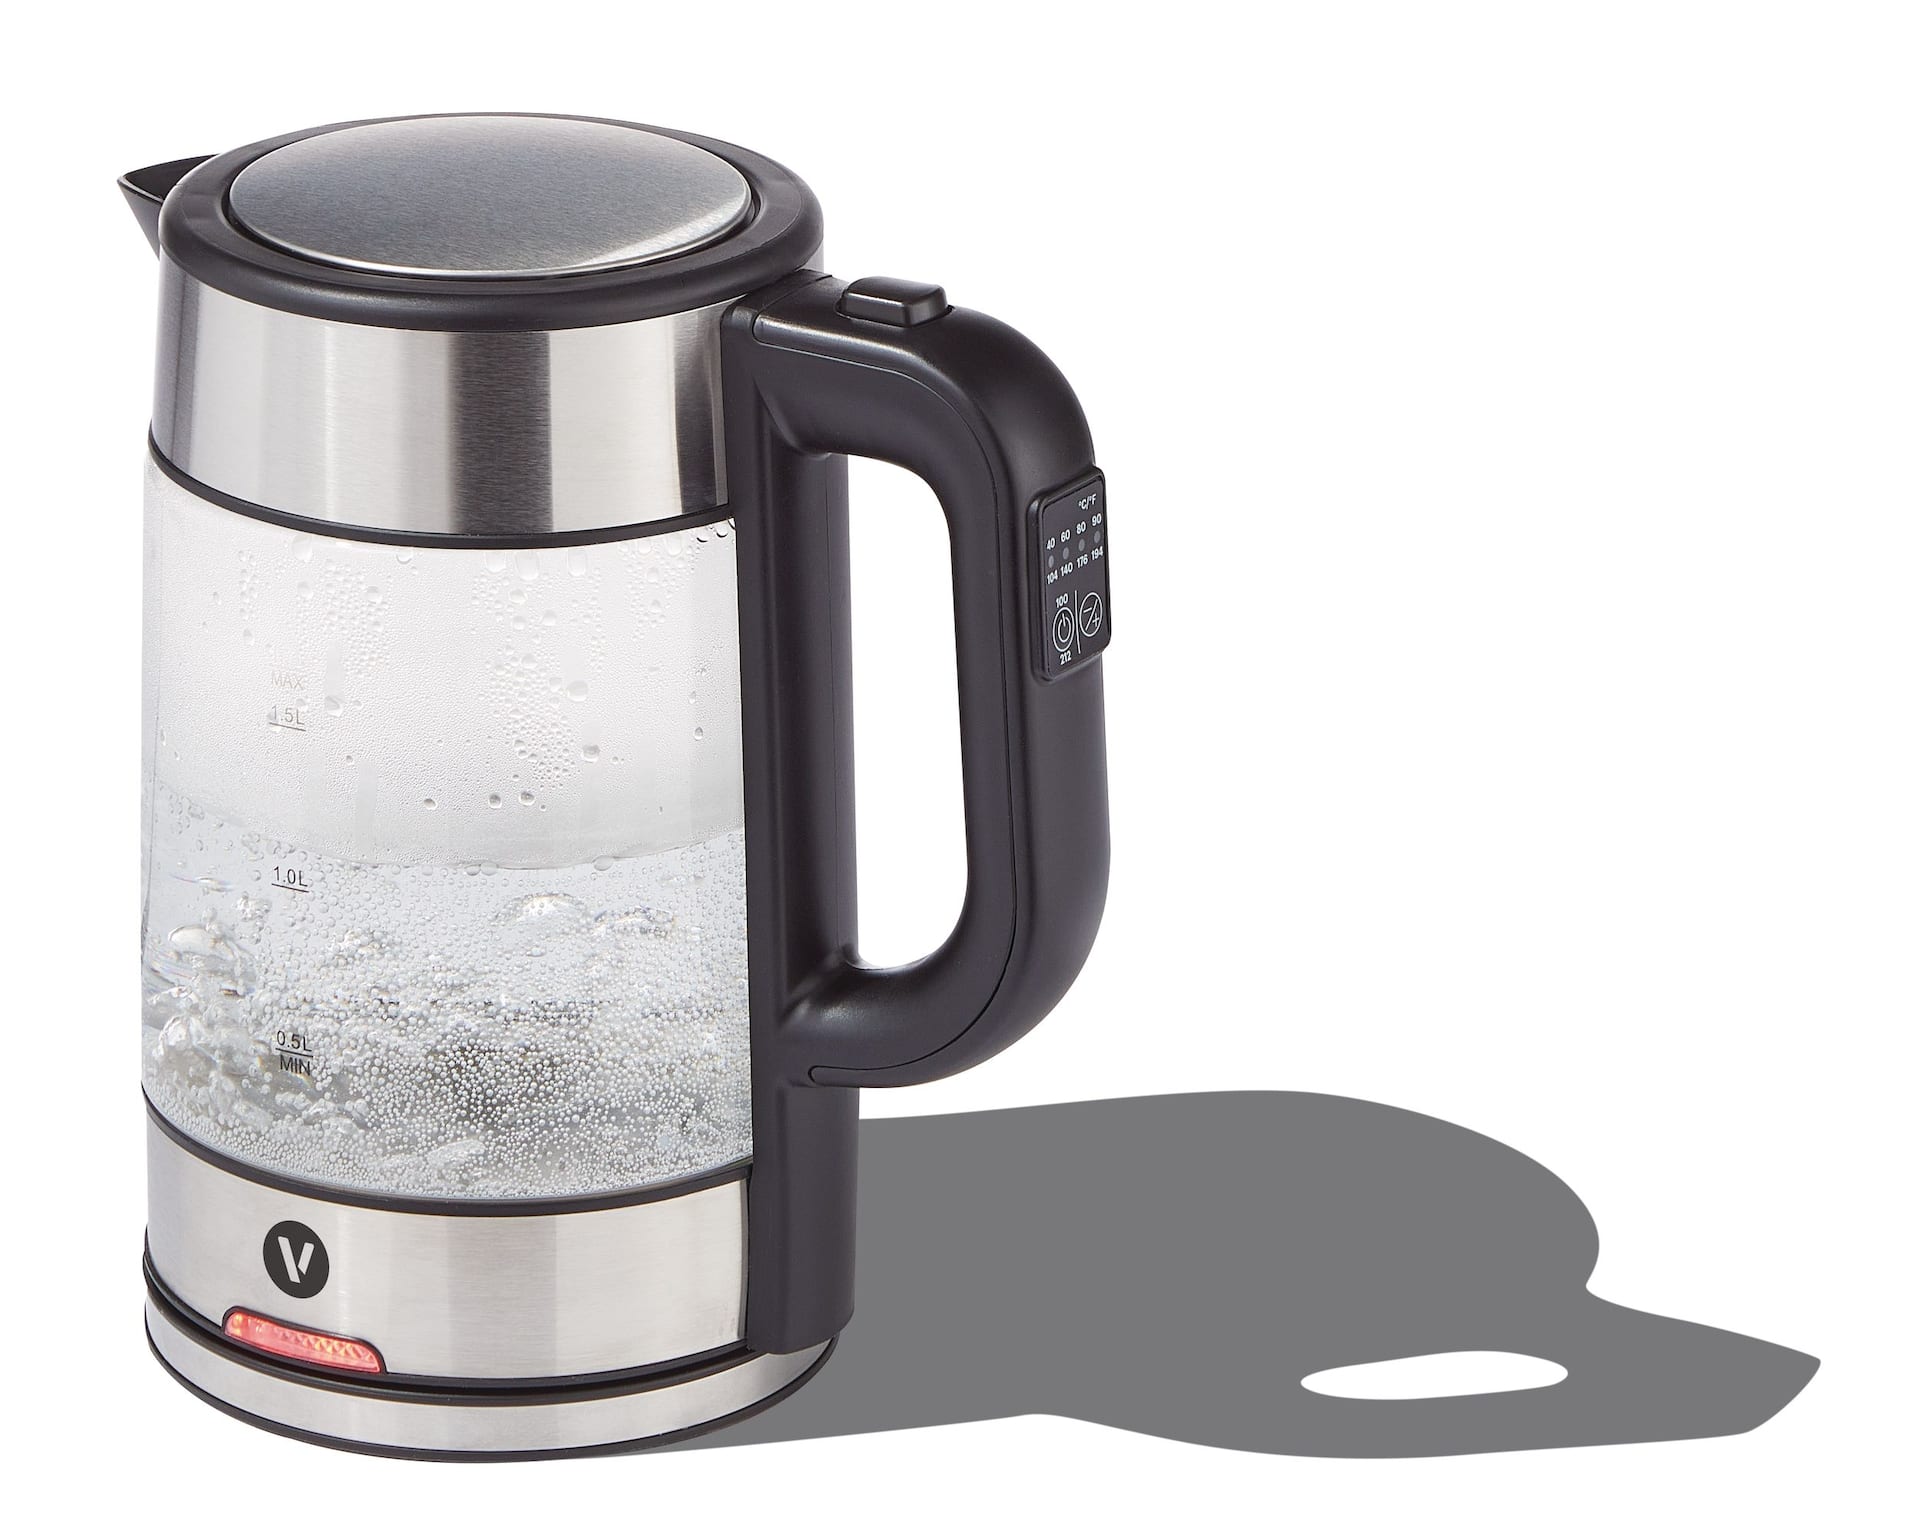 https://media-www.canadiantire.ca/product/living/kitchen/kitchen-appliances/0430191/vida-by-paderno-1-7l-variable-temperature-glass-kettle-bb99df40-0854-4d16-983b-ff4ae26e741d-jpgrendition.jpg